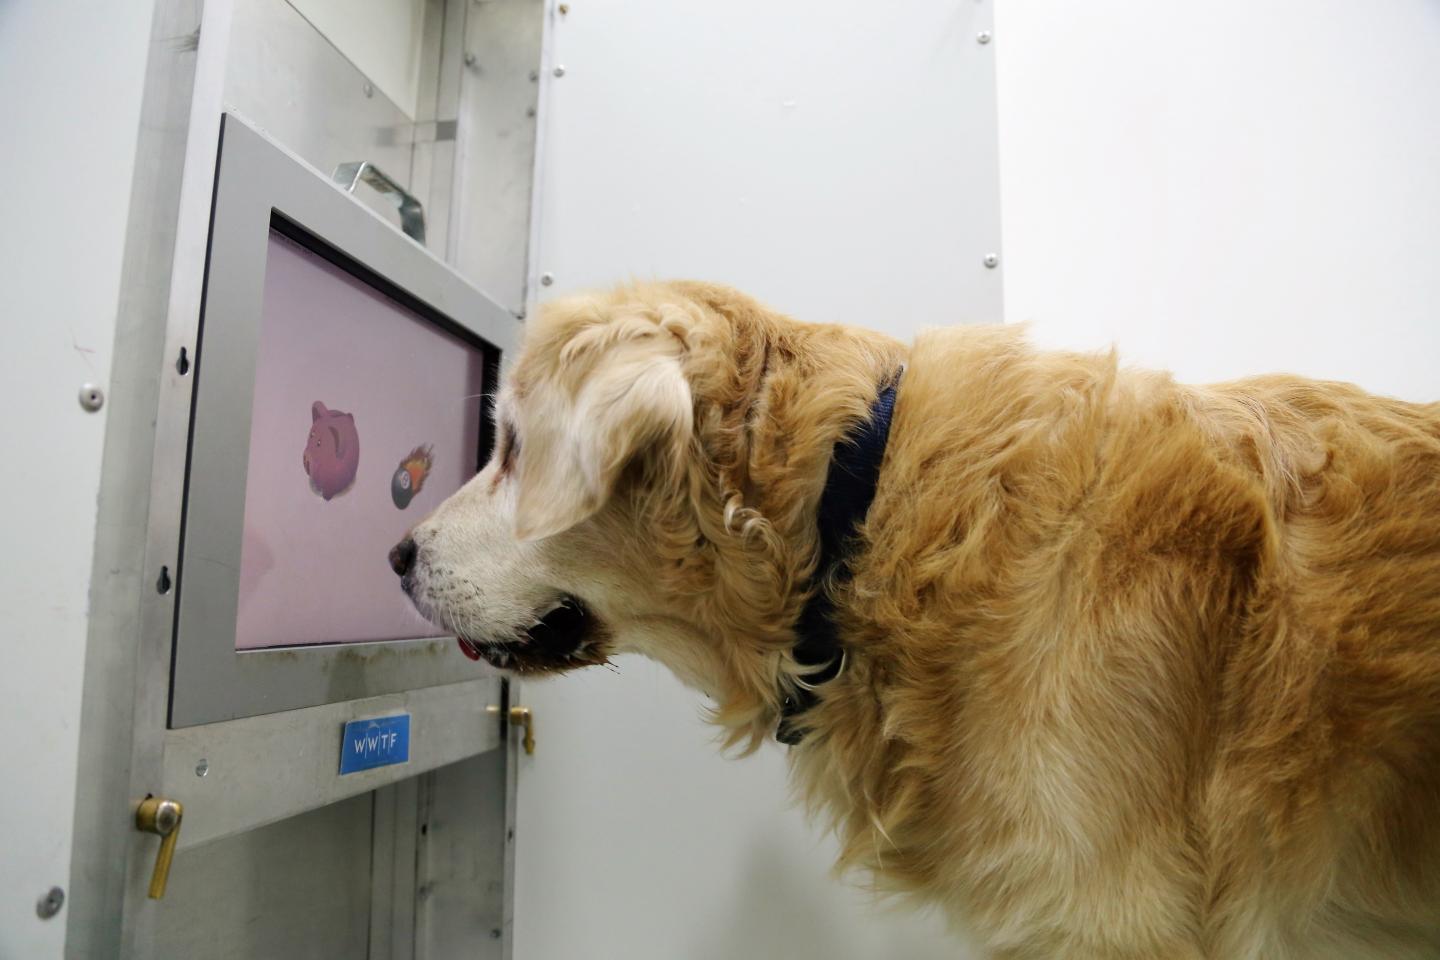 Playing computer games might be the perfect 'brain training' for old dogs. Source: Messerli Research Institute/Vetmeduni Vienna